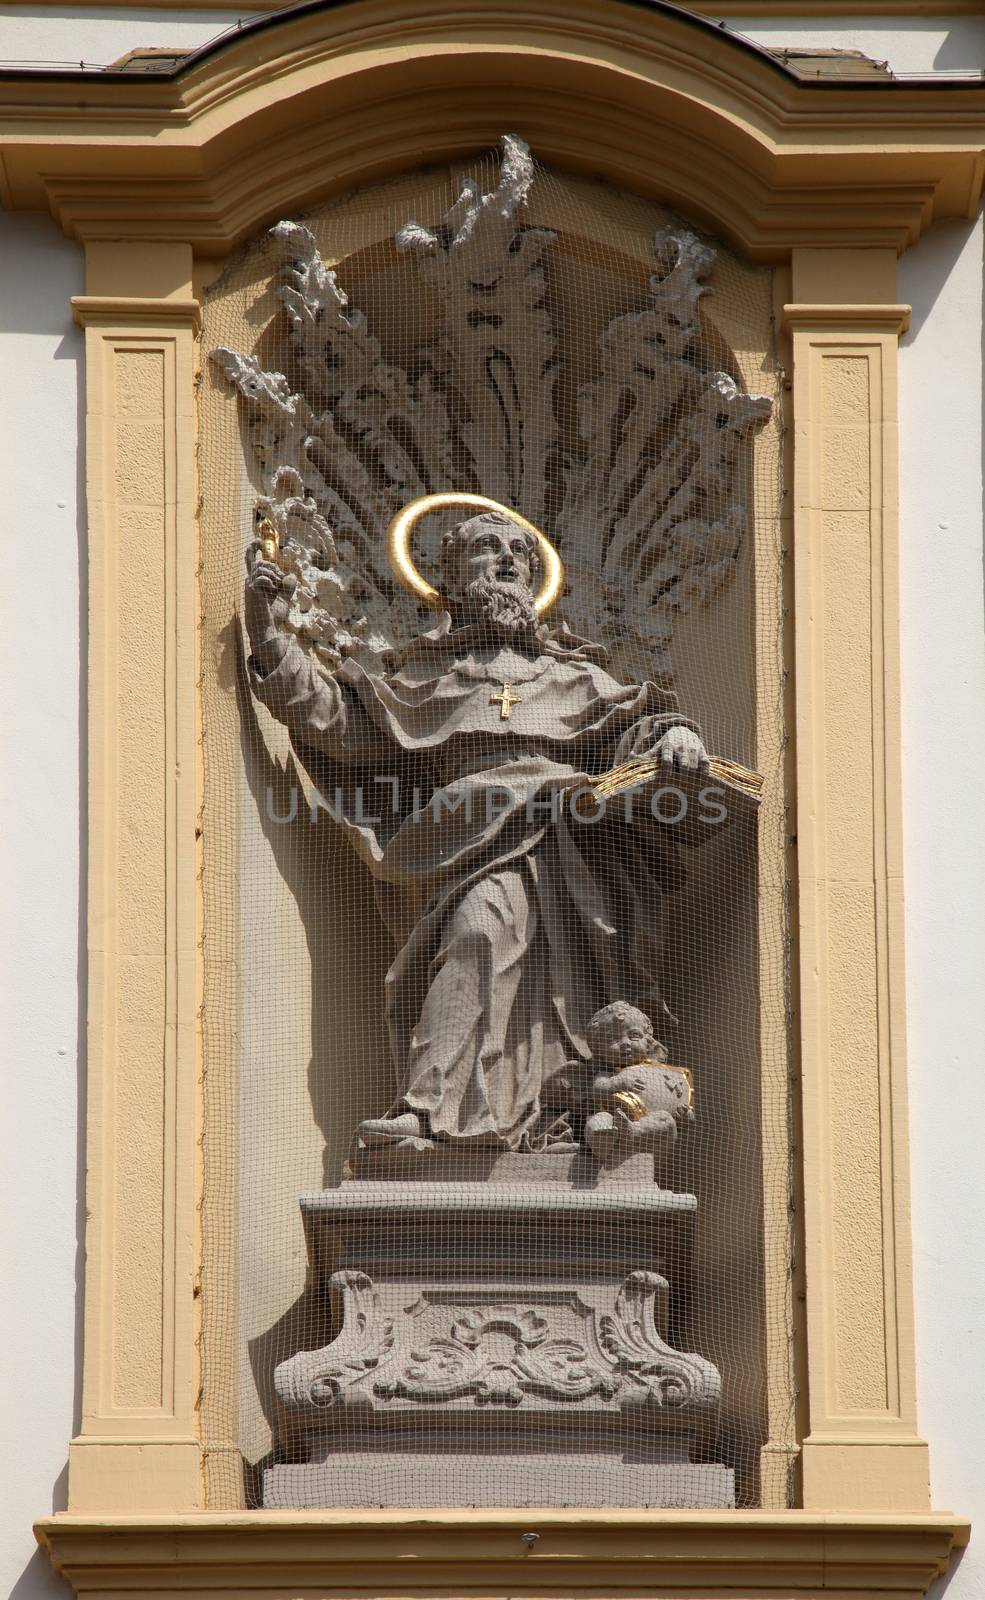 Saint Augustine on the facade of St. Augustine's Church in Wurzburg